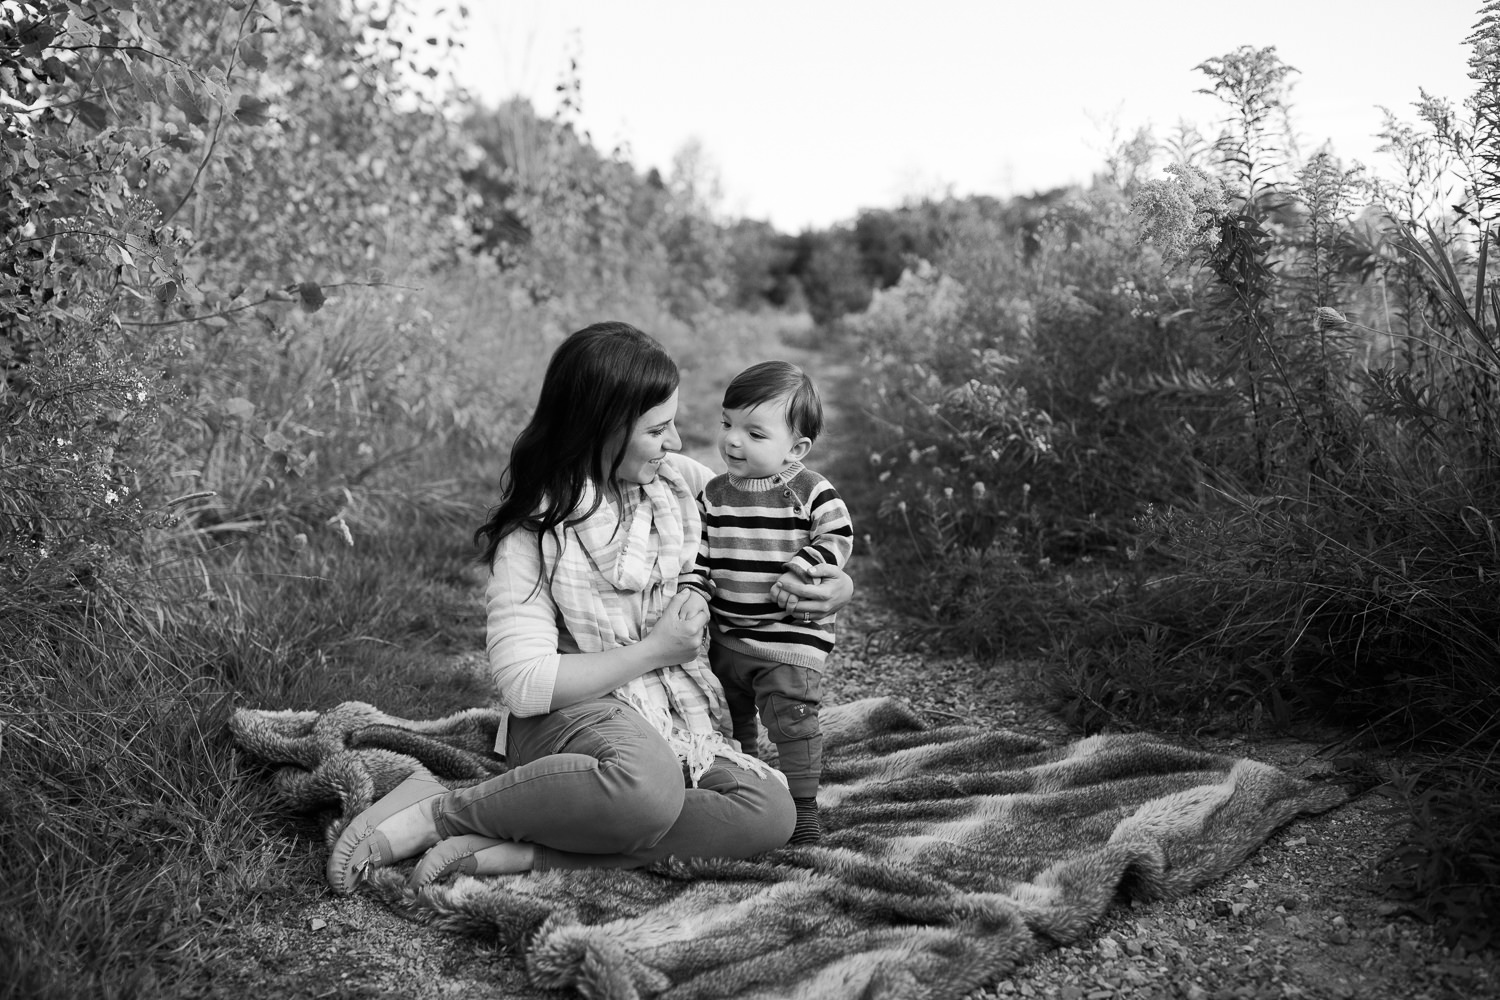 mother sitting on fur blanket on outdoor grassy path, 1 year old baby boy standing next to her, mom and son smiling at each other - GTA Golden Hour Photography